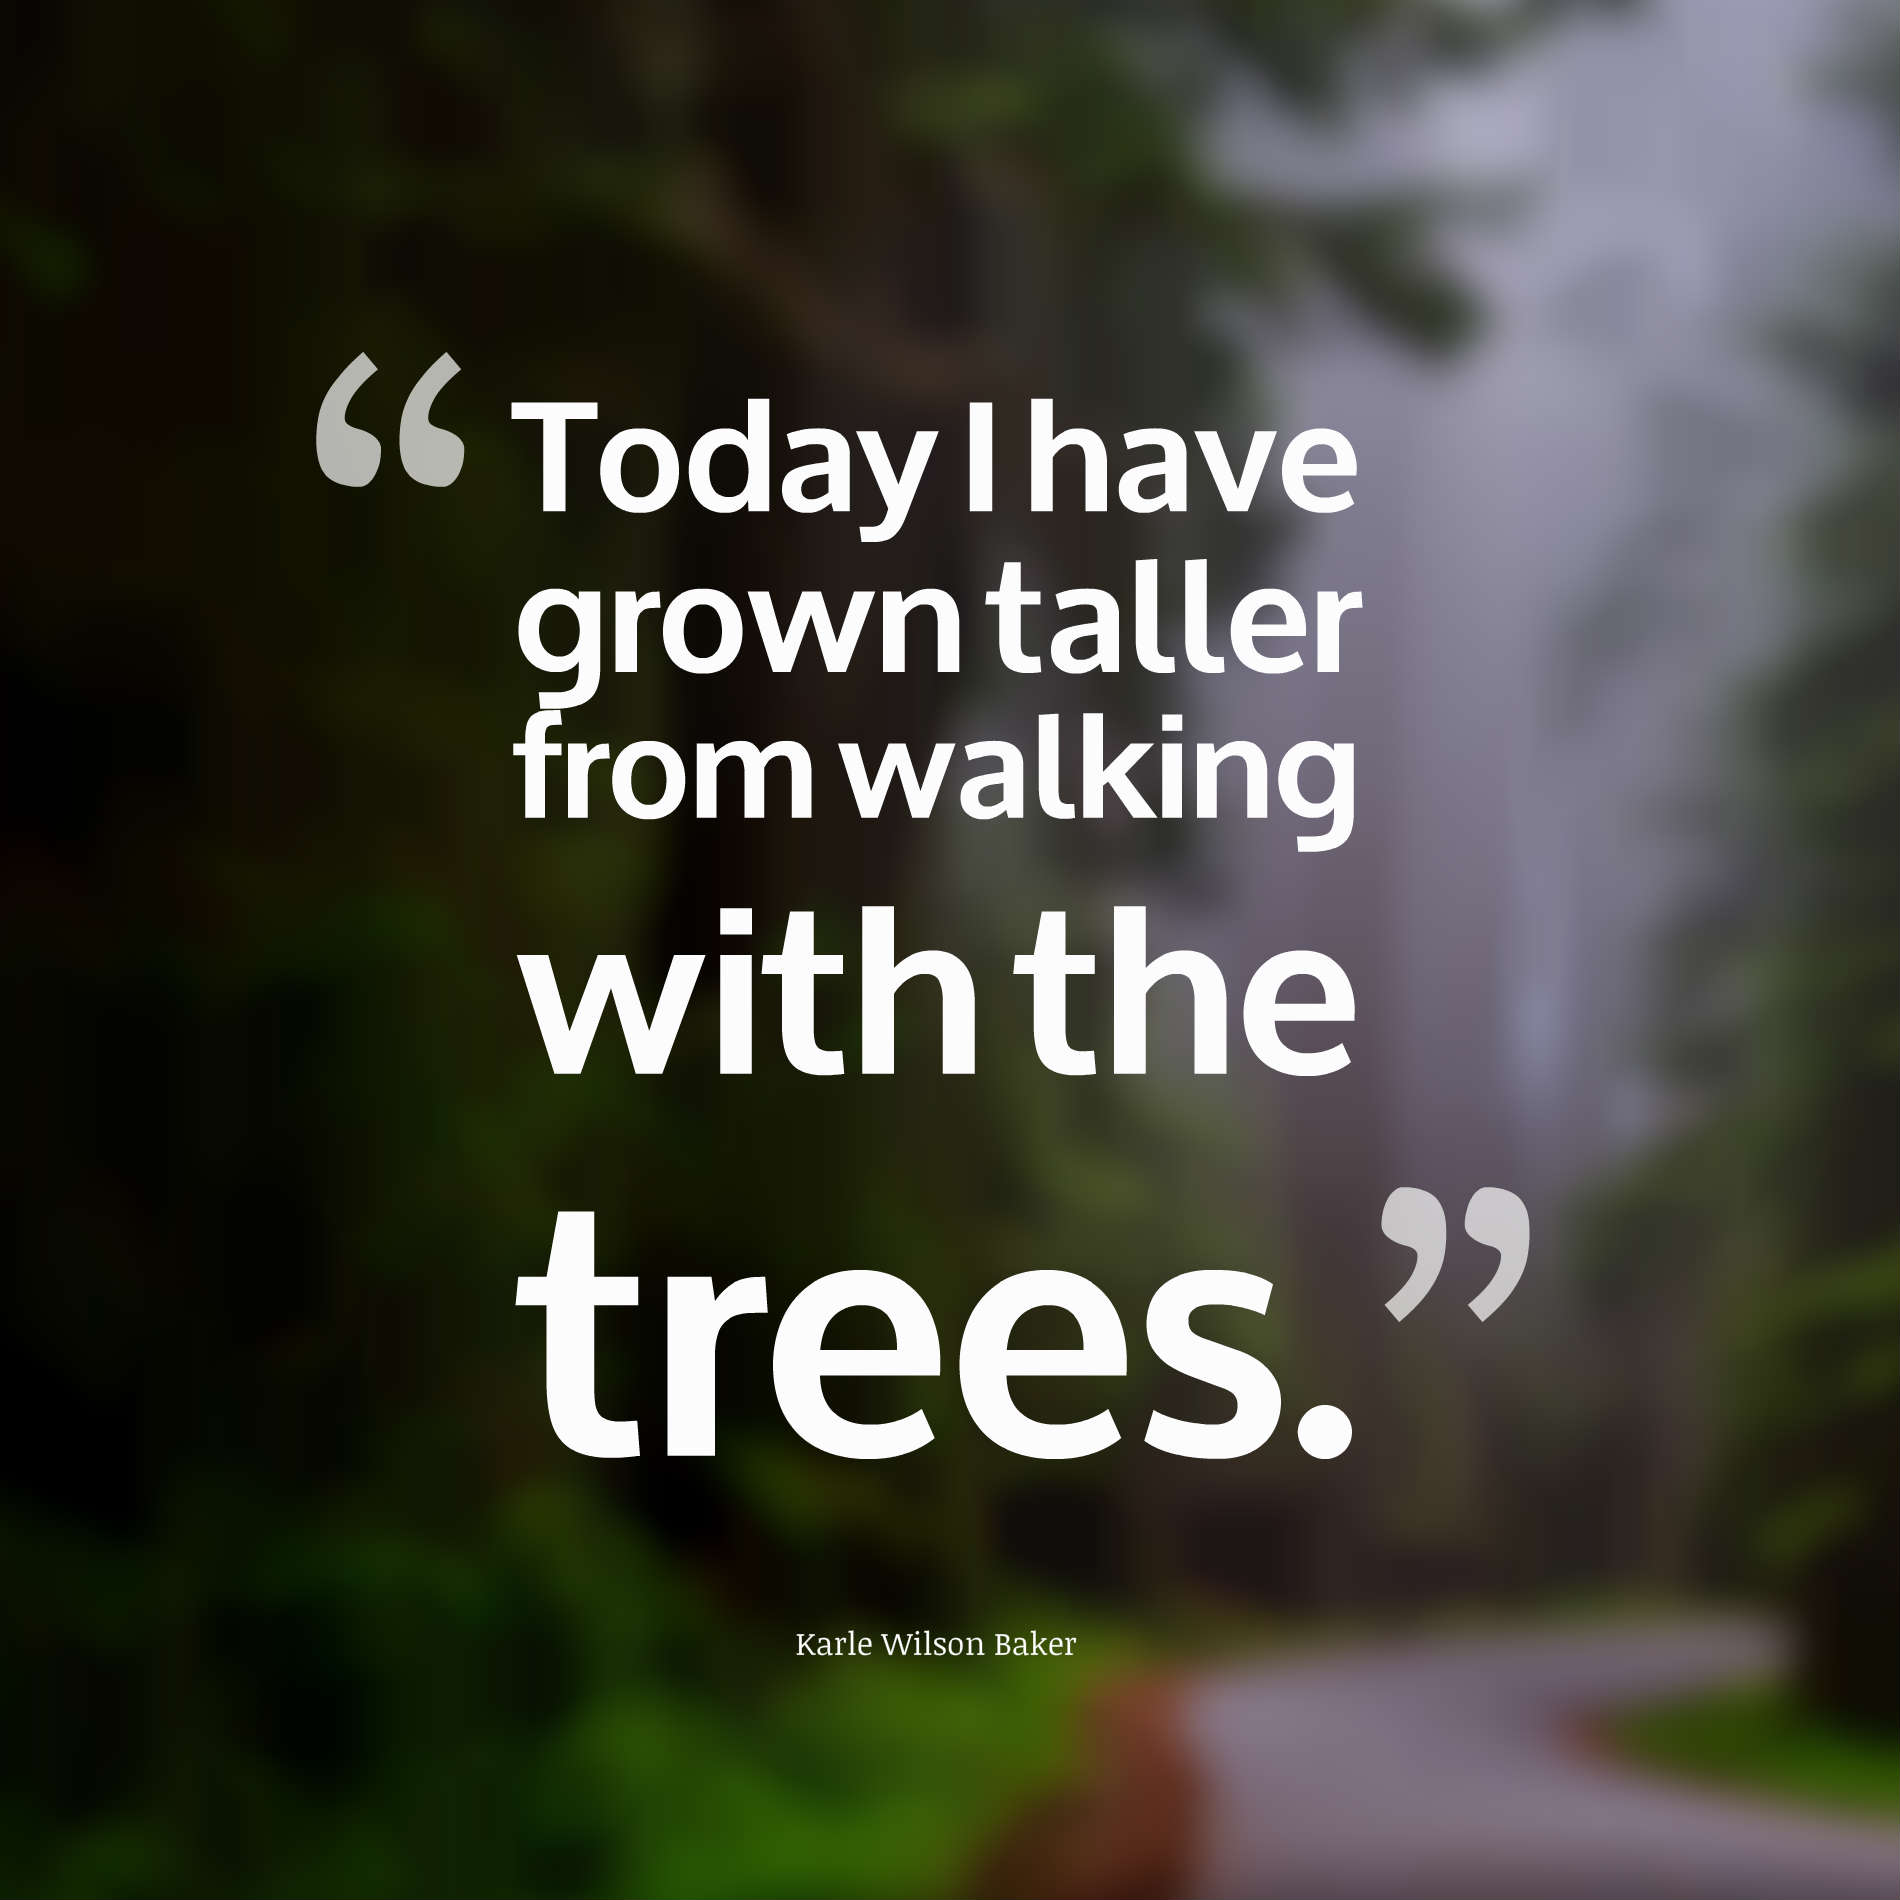 Today I have grown taller from walking with the trees.